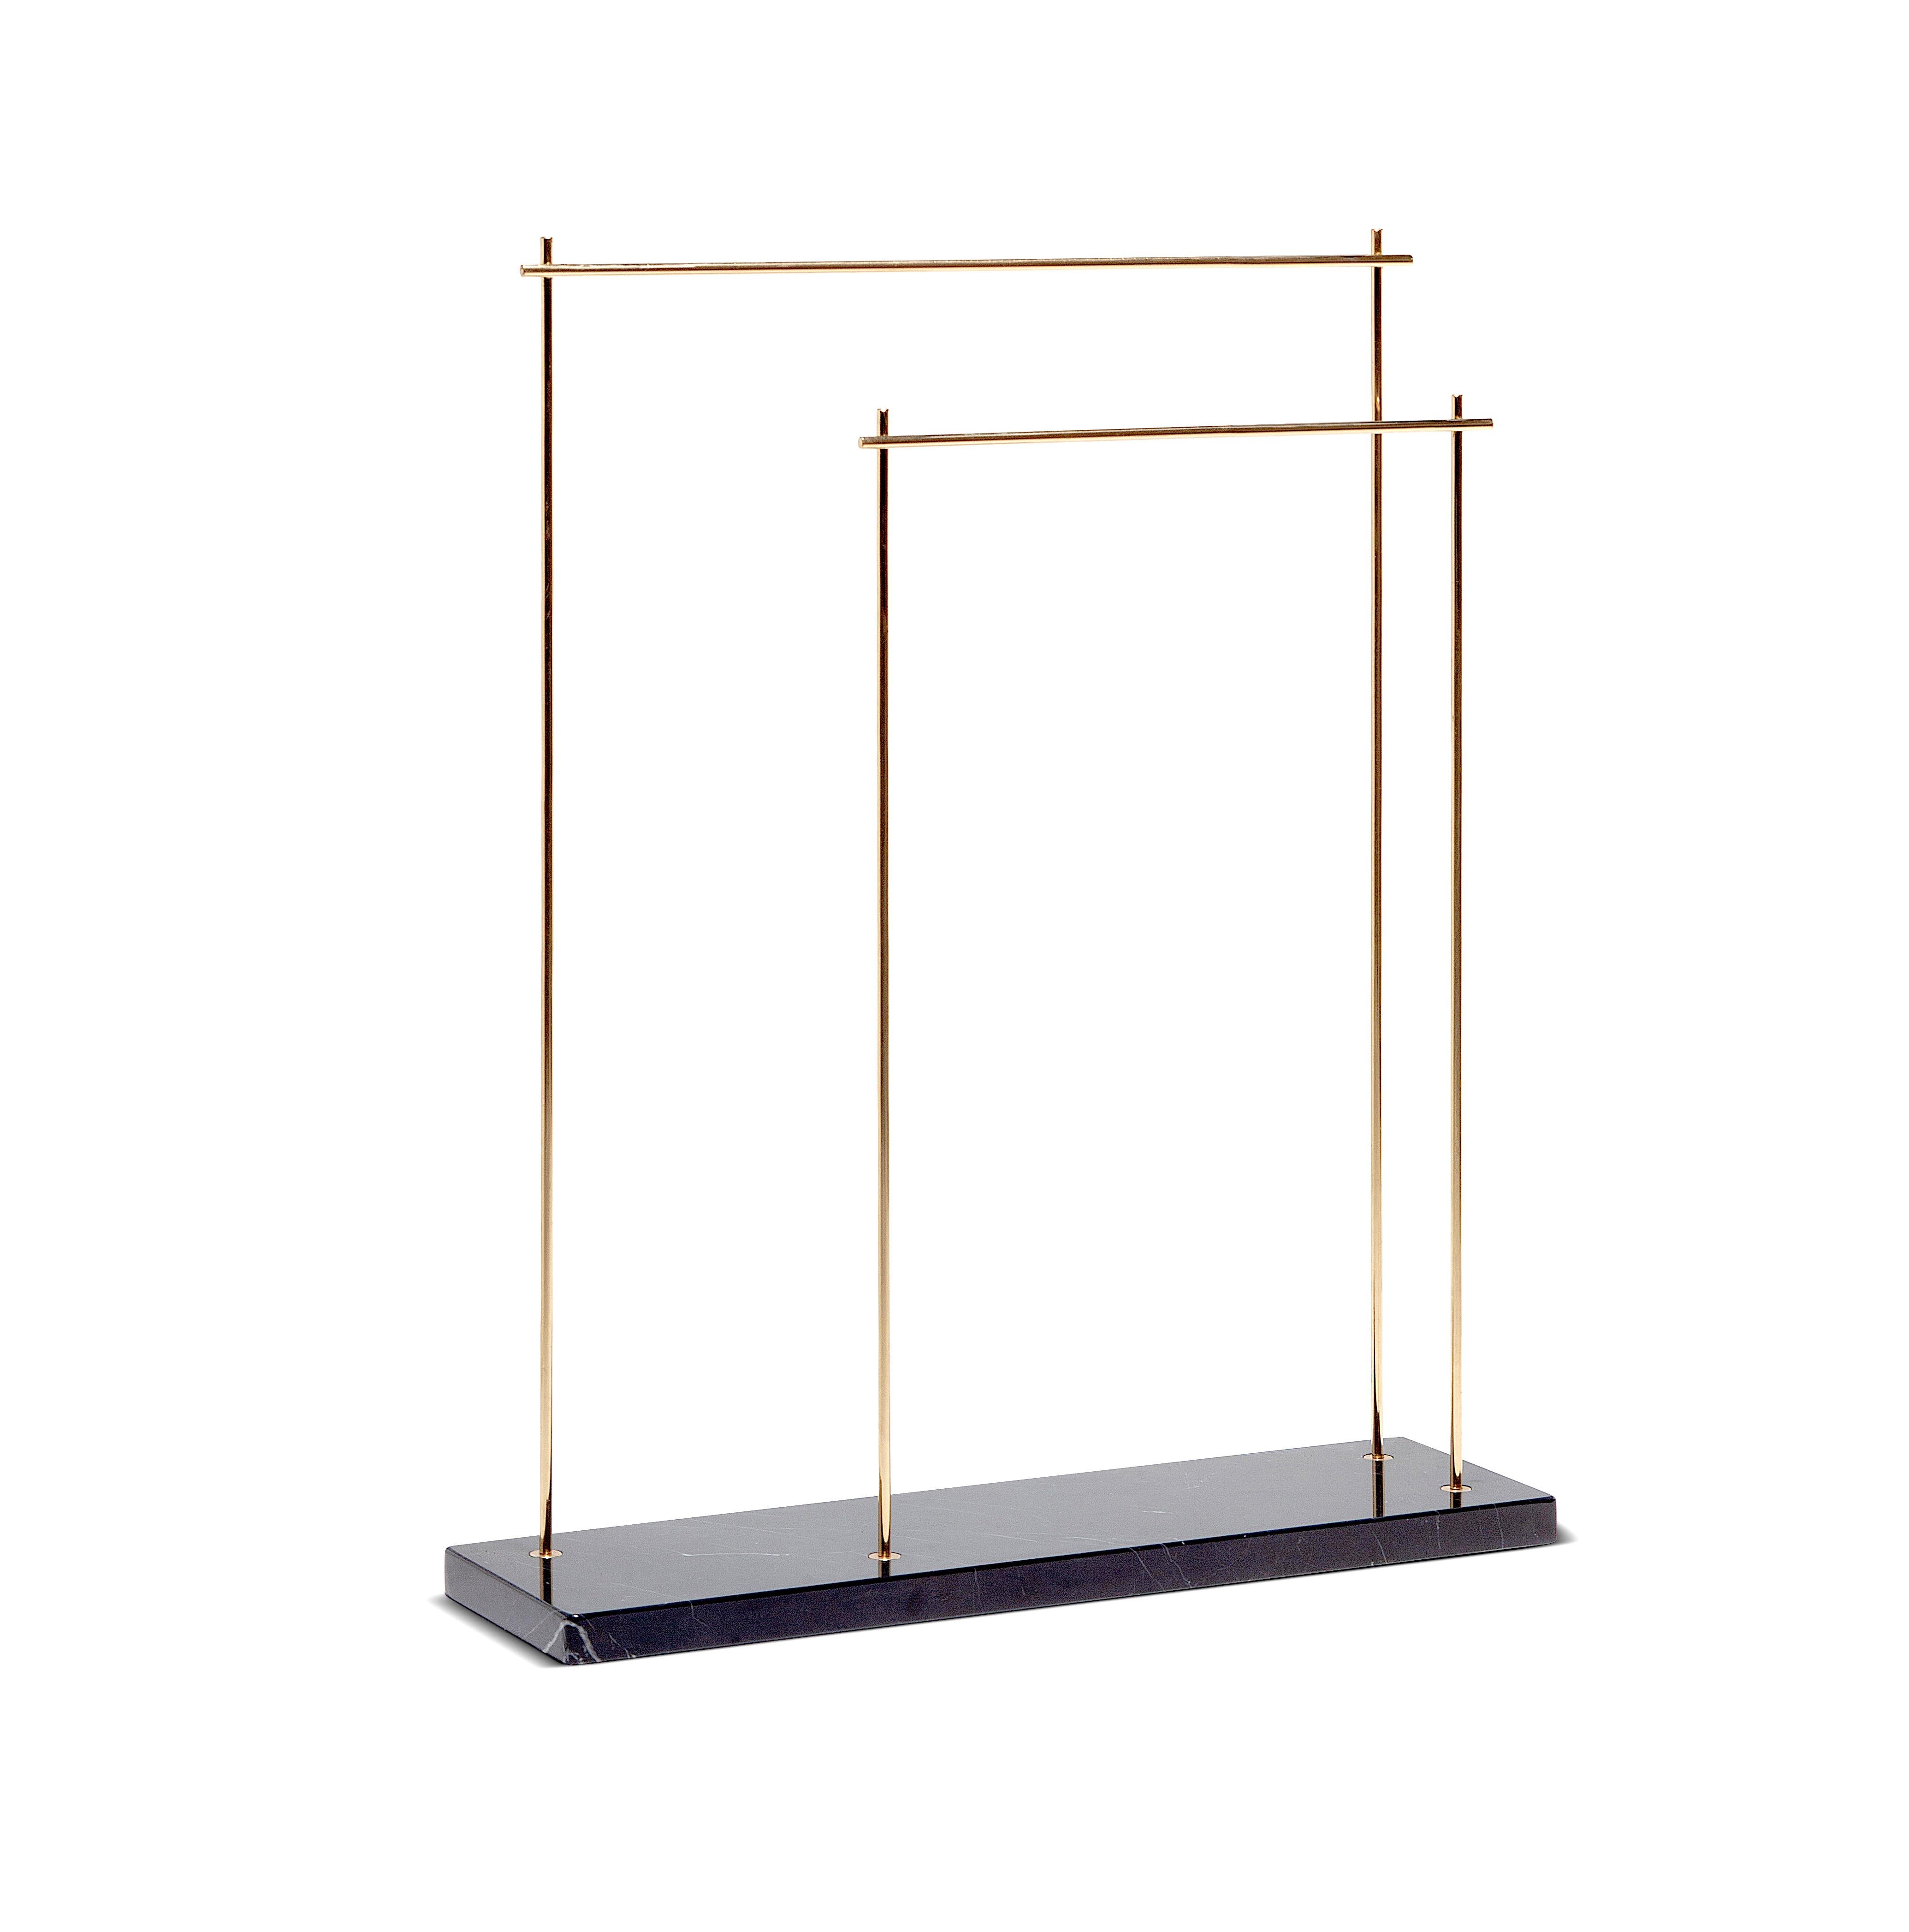 Rack towel holder by Joseph Vila Capdevila
Material: Marquina marble, brass
Dimensions: 70 x 84.5 x 20 cm
Weight: 13.2 kg

Aparentment is a space for creation and innovation, experimenting with materials with the goal to develop robust, lasting and